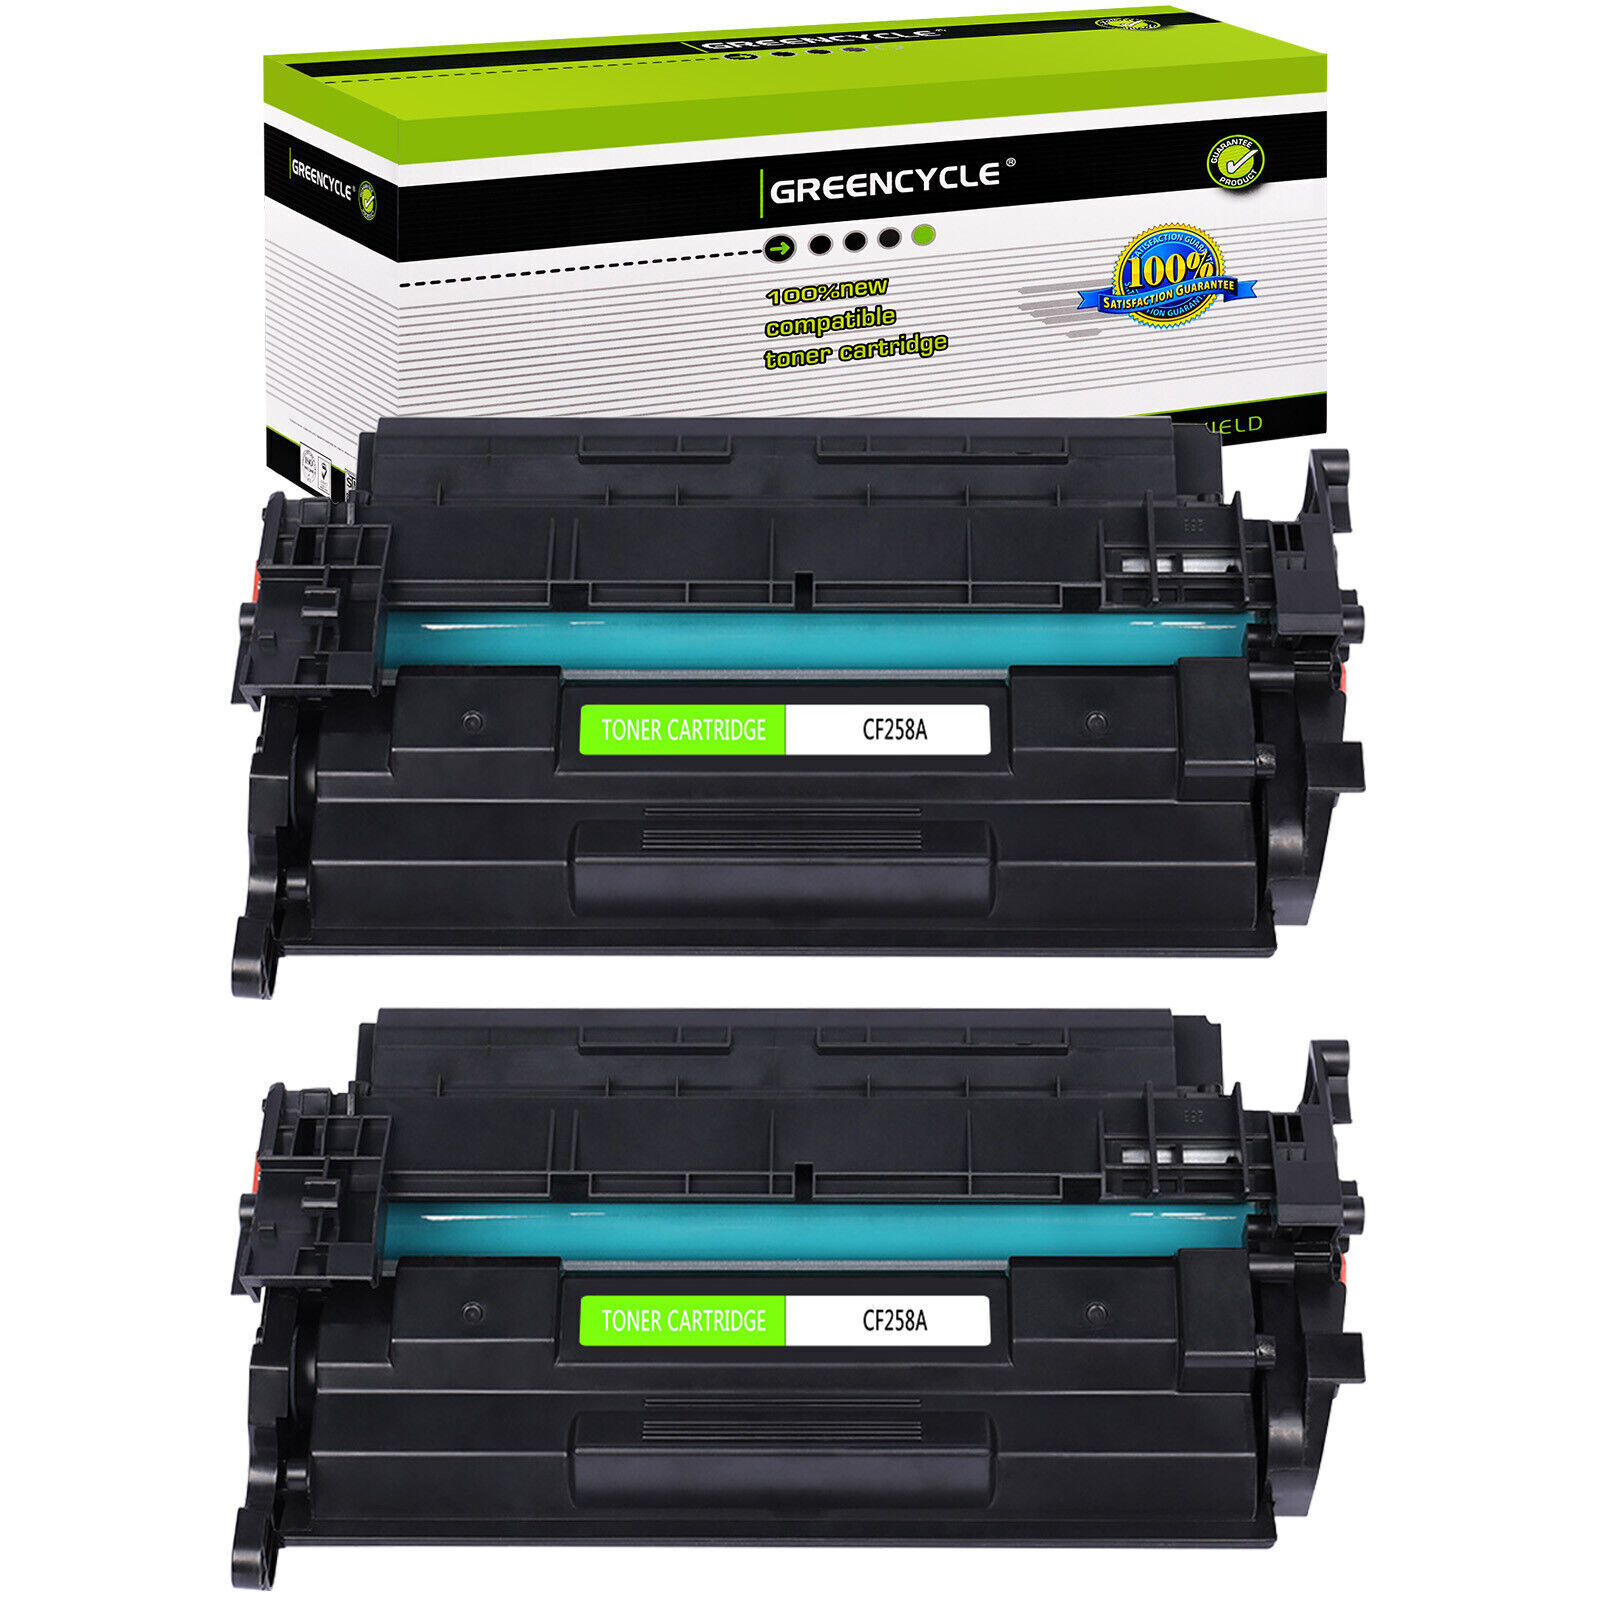 2PK GREENCYCLE CF258A Toner WITHOUT CHIP for HP 58A Laserjet Pro MFP M428 M304